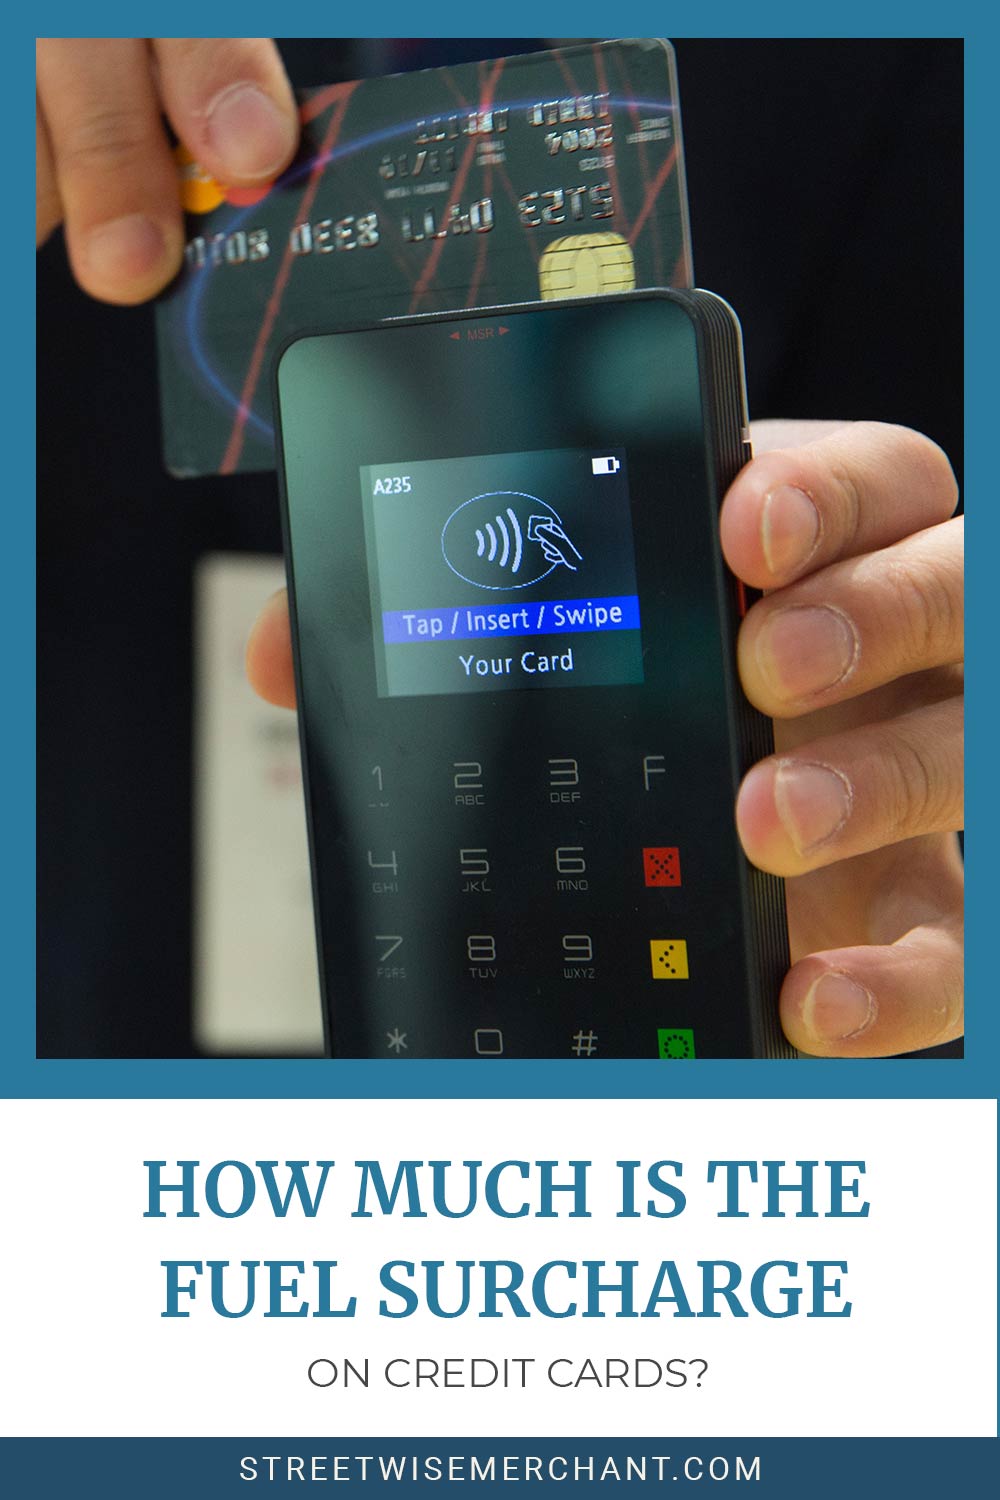 Person holding a credit card reader and a card - How Much is the Fuel Surcharge On Credit Cards?